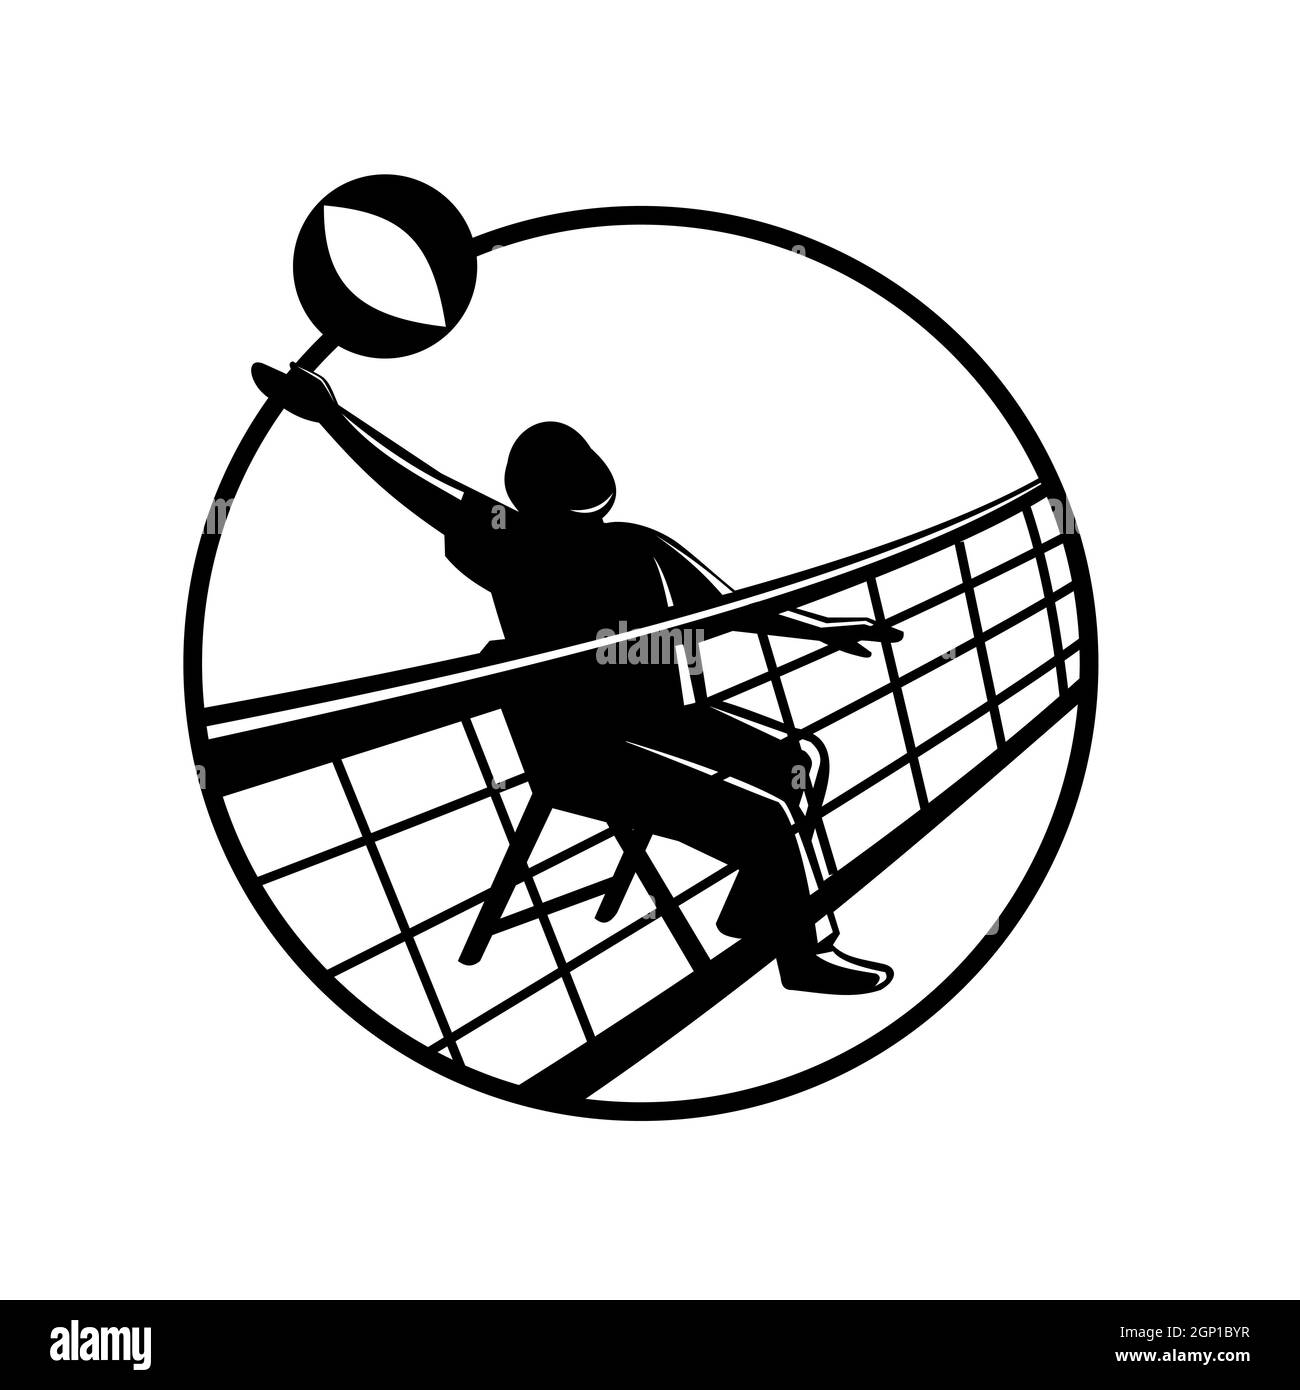 Chair volleyball Black and White Stock Photos & Images - Alamy